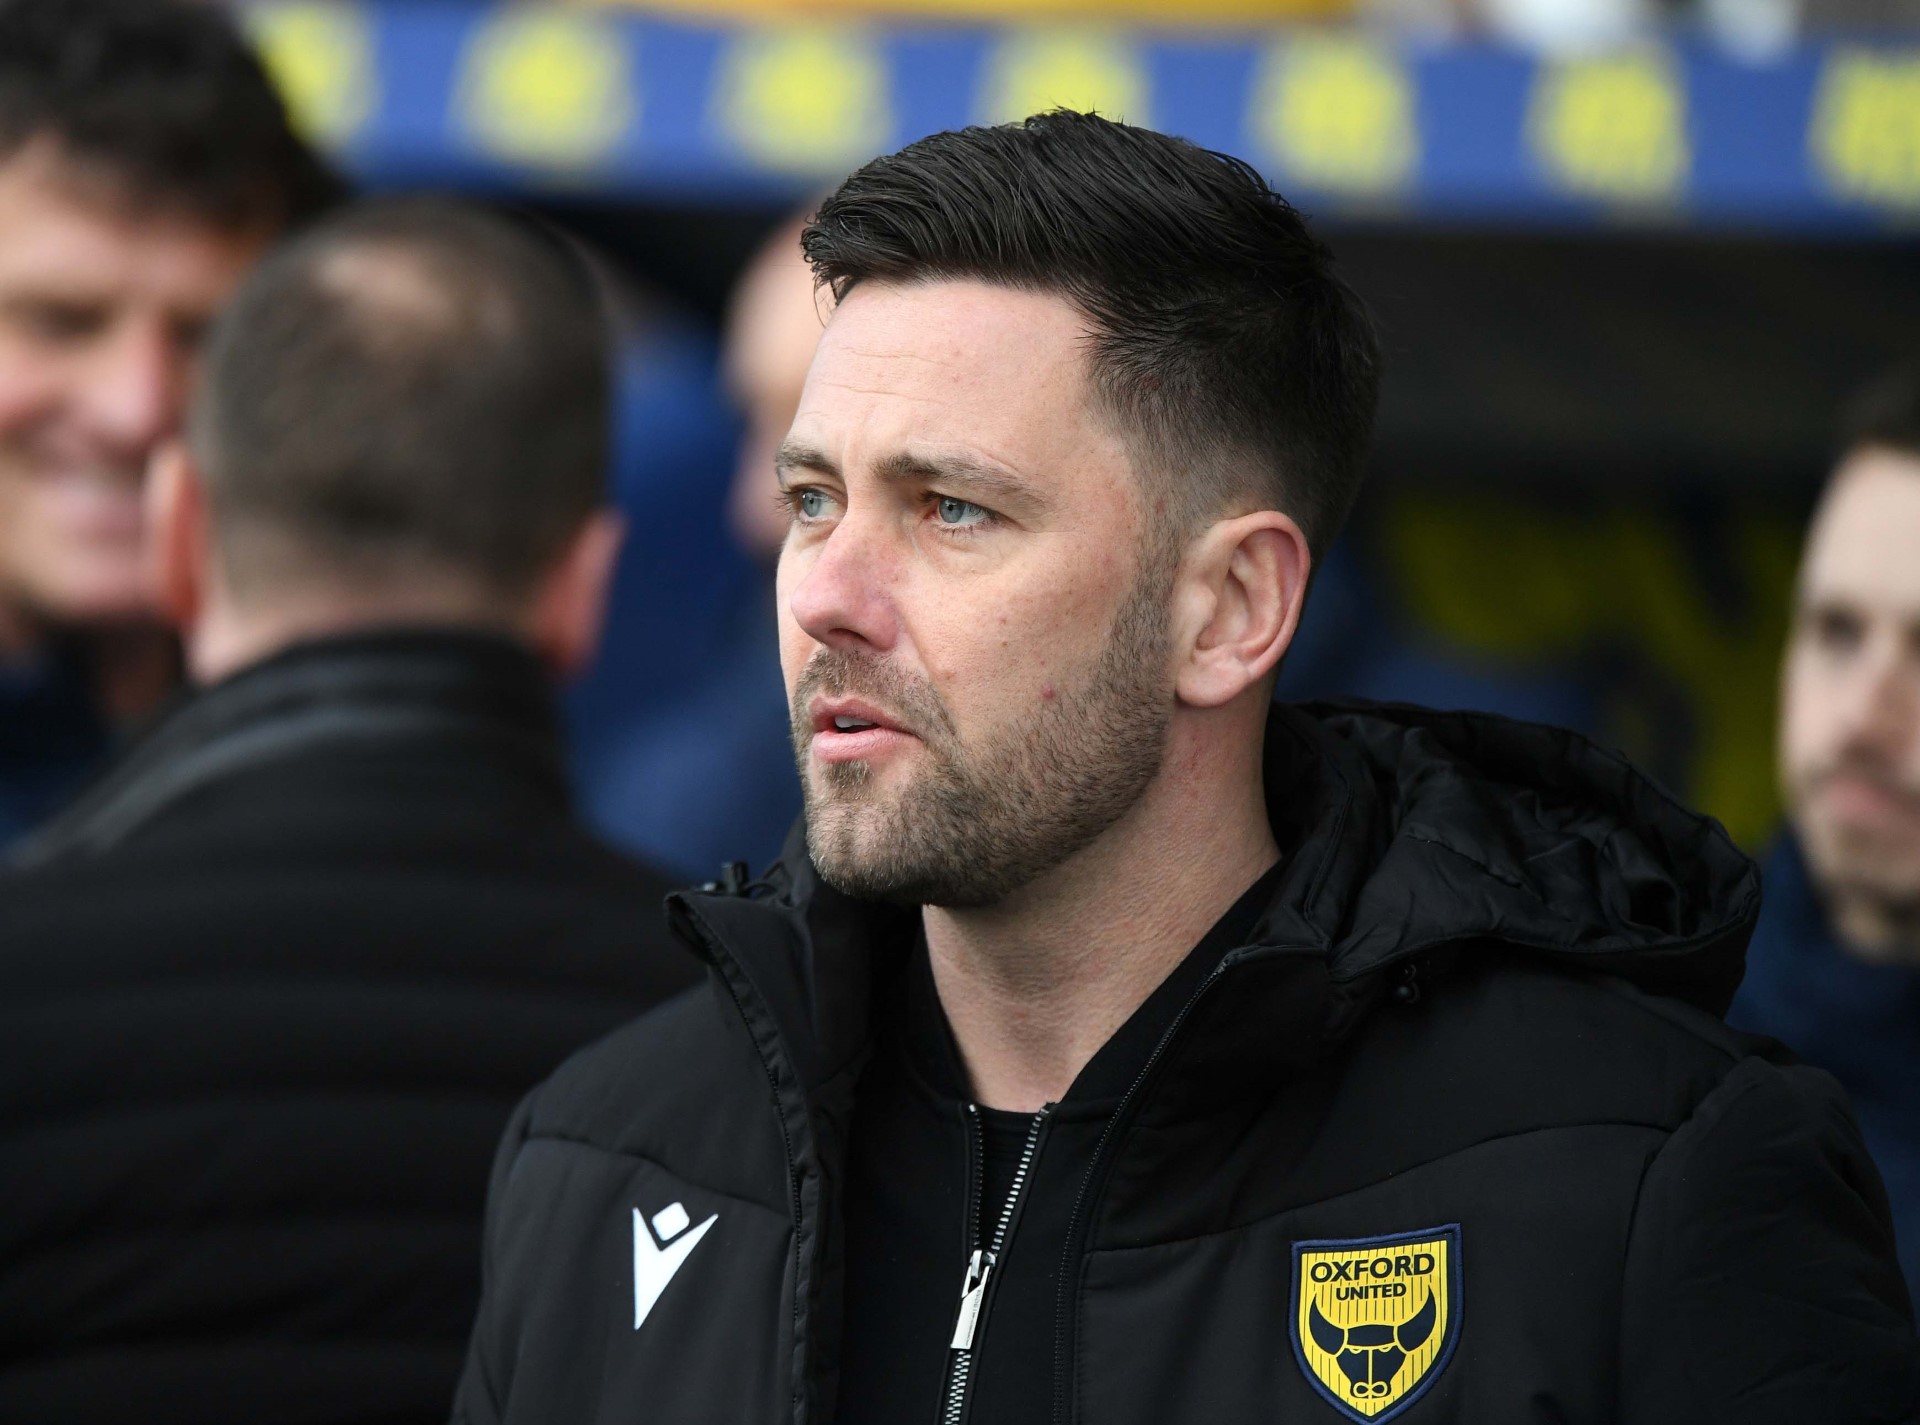 Oxford United boss Des Buckingham on game plan and use of wingers